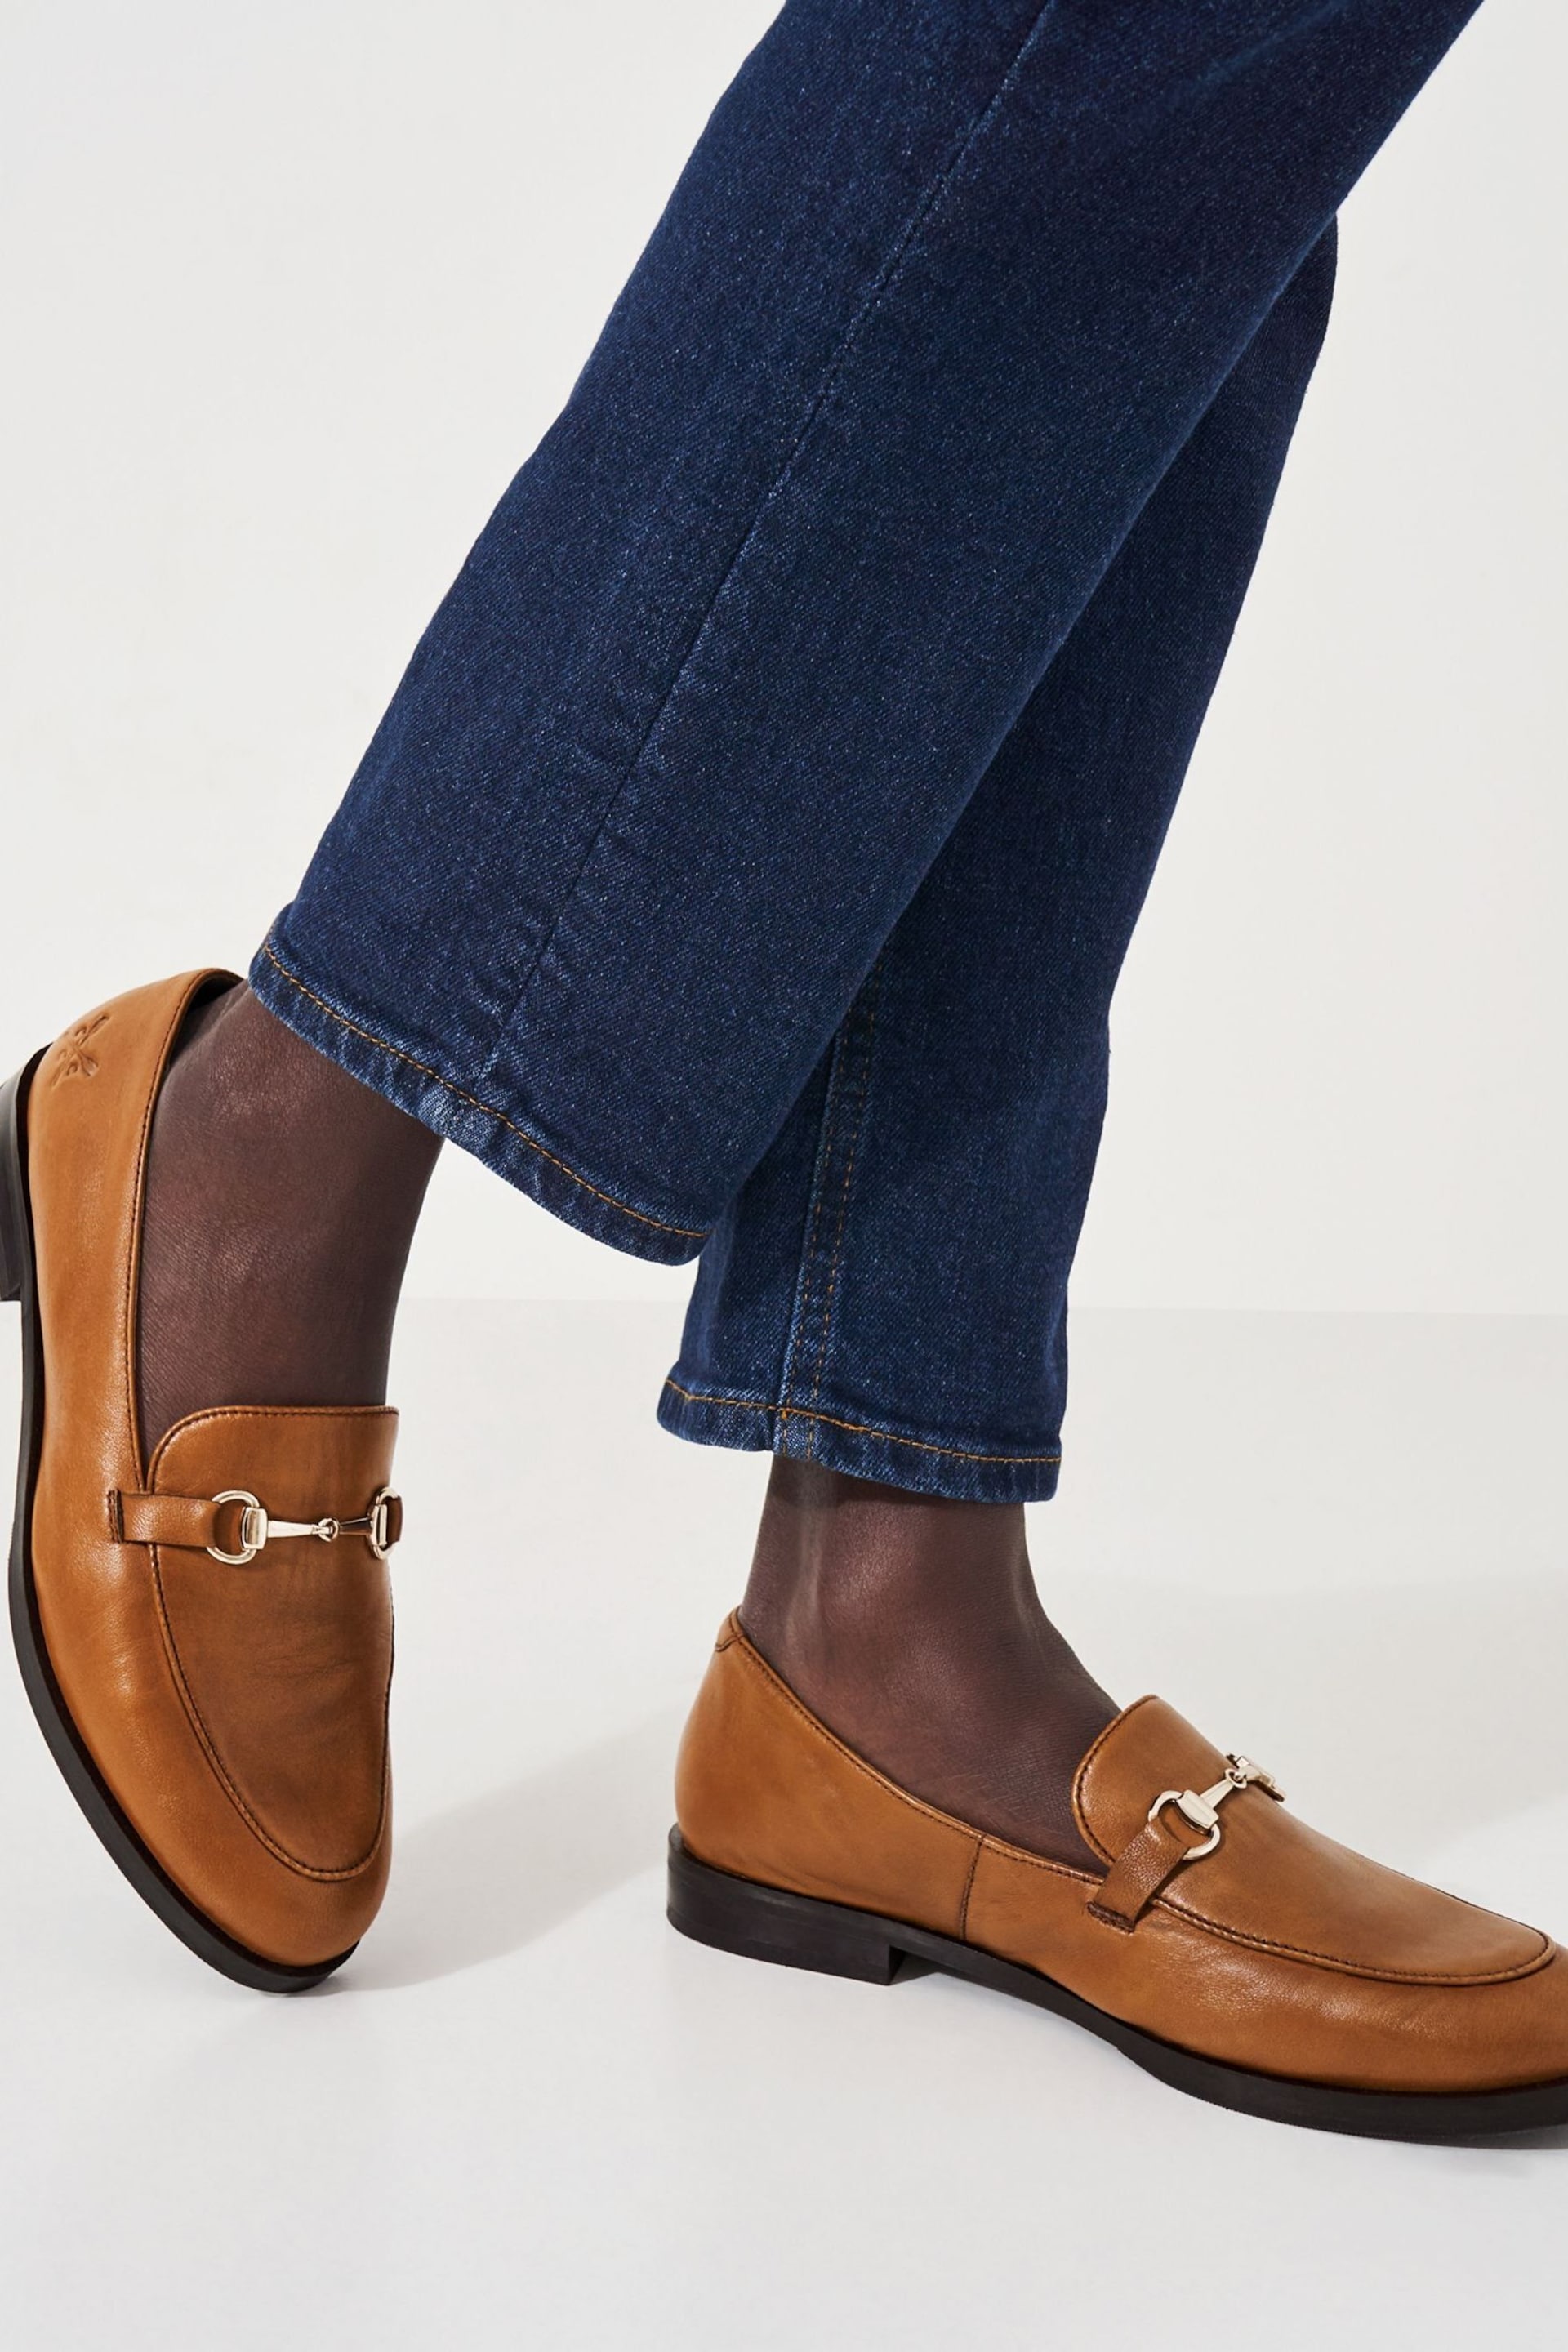 Crew Clothing Suede Snaffle Loafers - Image 1 of 5